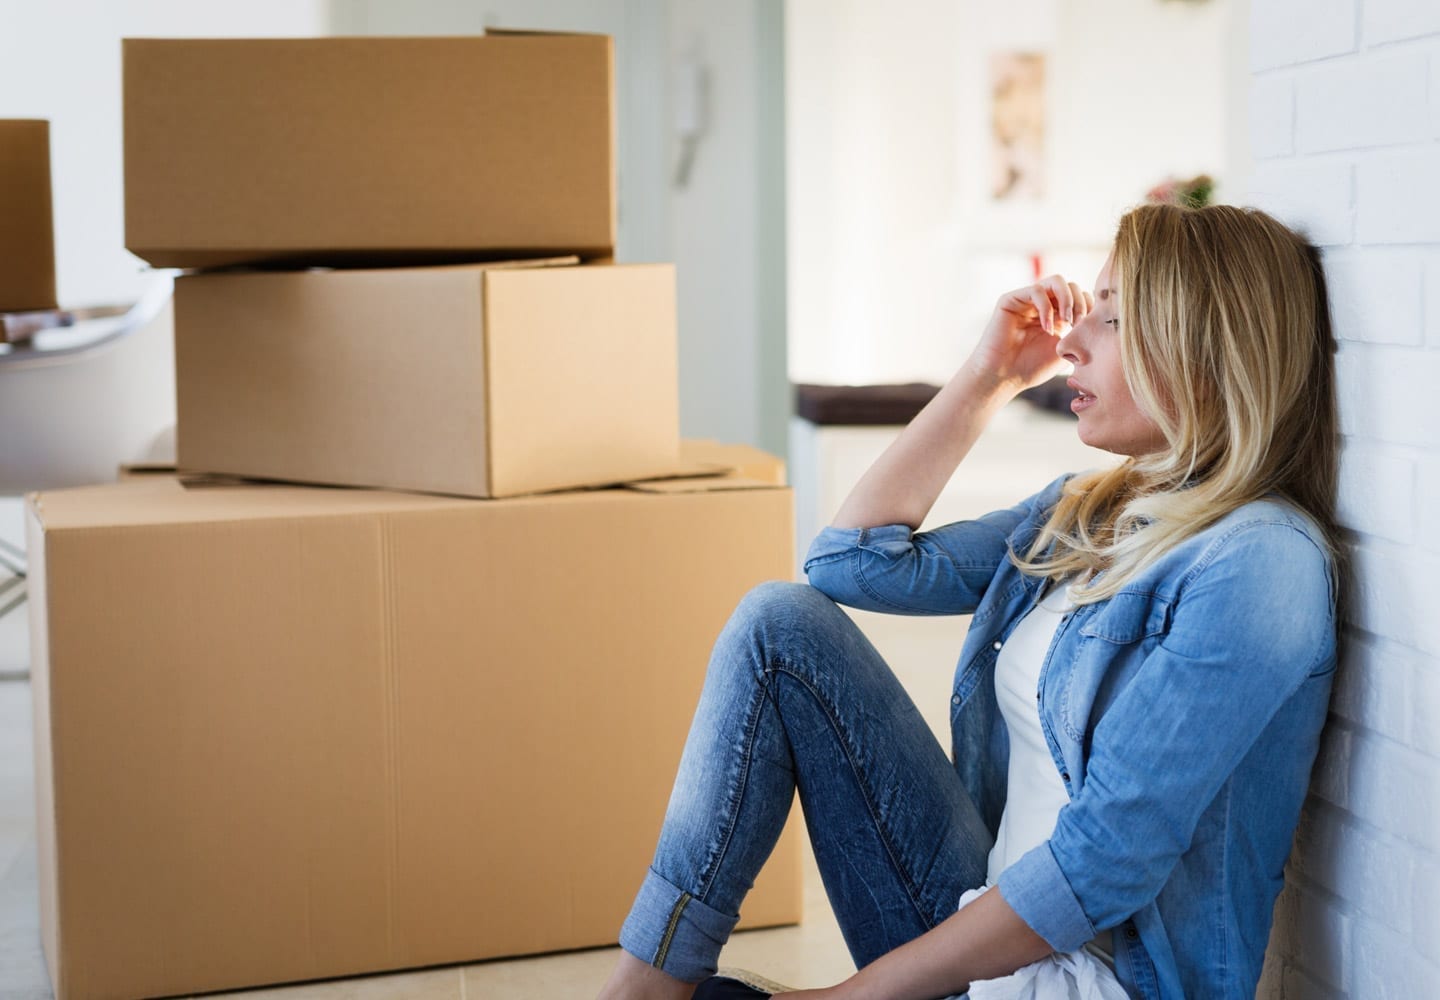 7 Golden Tips to Reduce the Stress of Moving